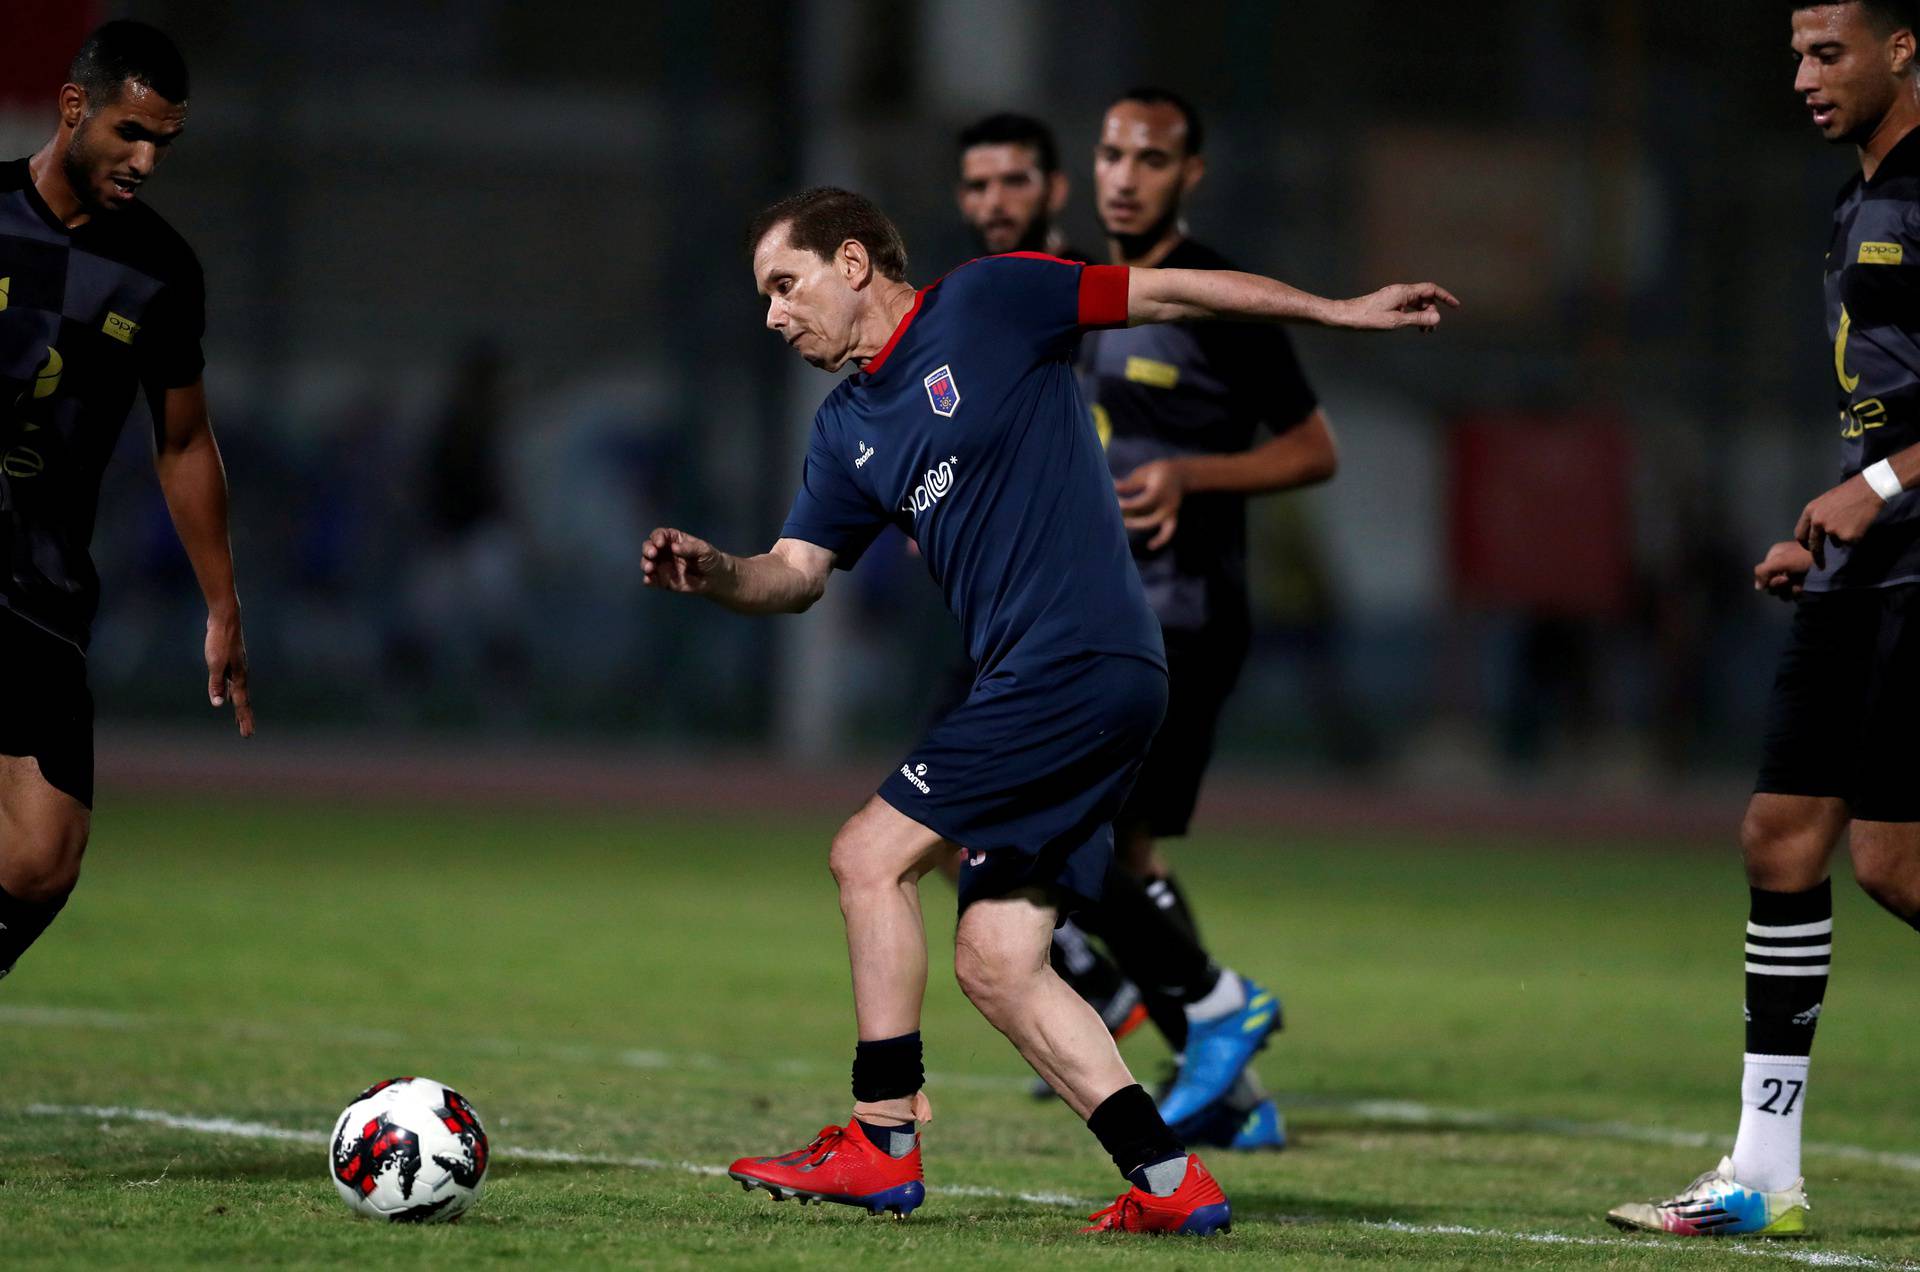 Ezzeldin Bahader, a 74-years-old Egyptian football player of 6th October Club is seen in action during a soccer match against El Ayat Sports Club of Egypt's third division league at the Olympic Stadium in the Cairo suburb of Maadi